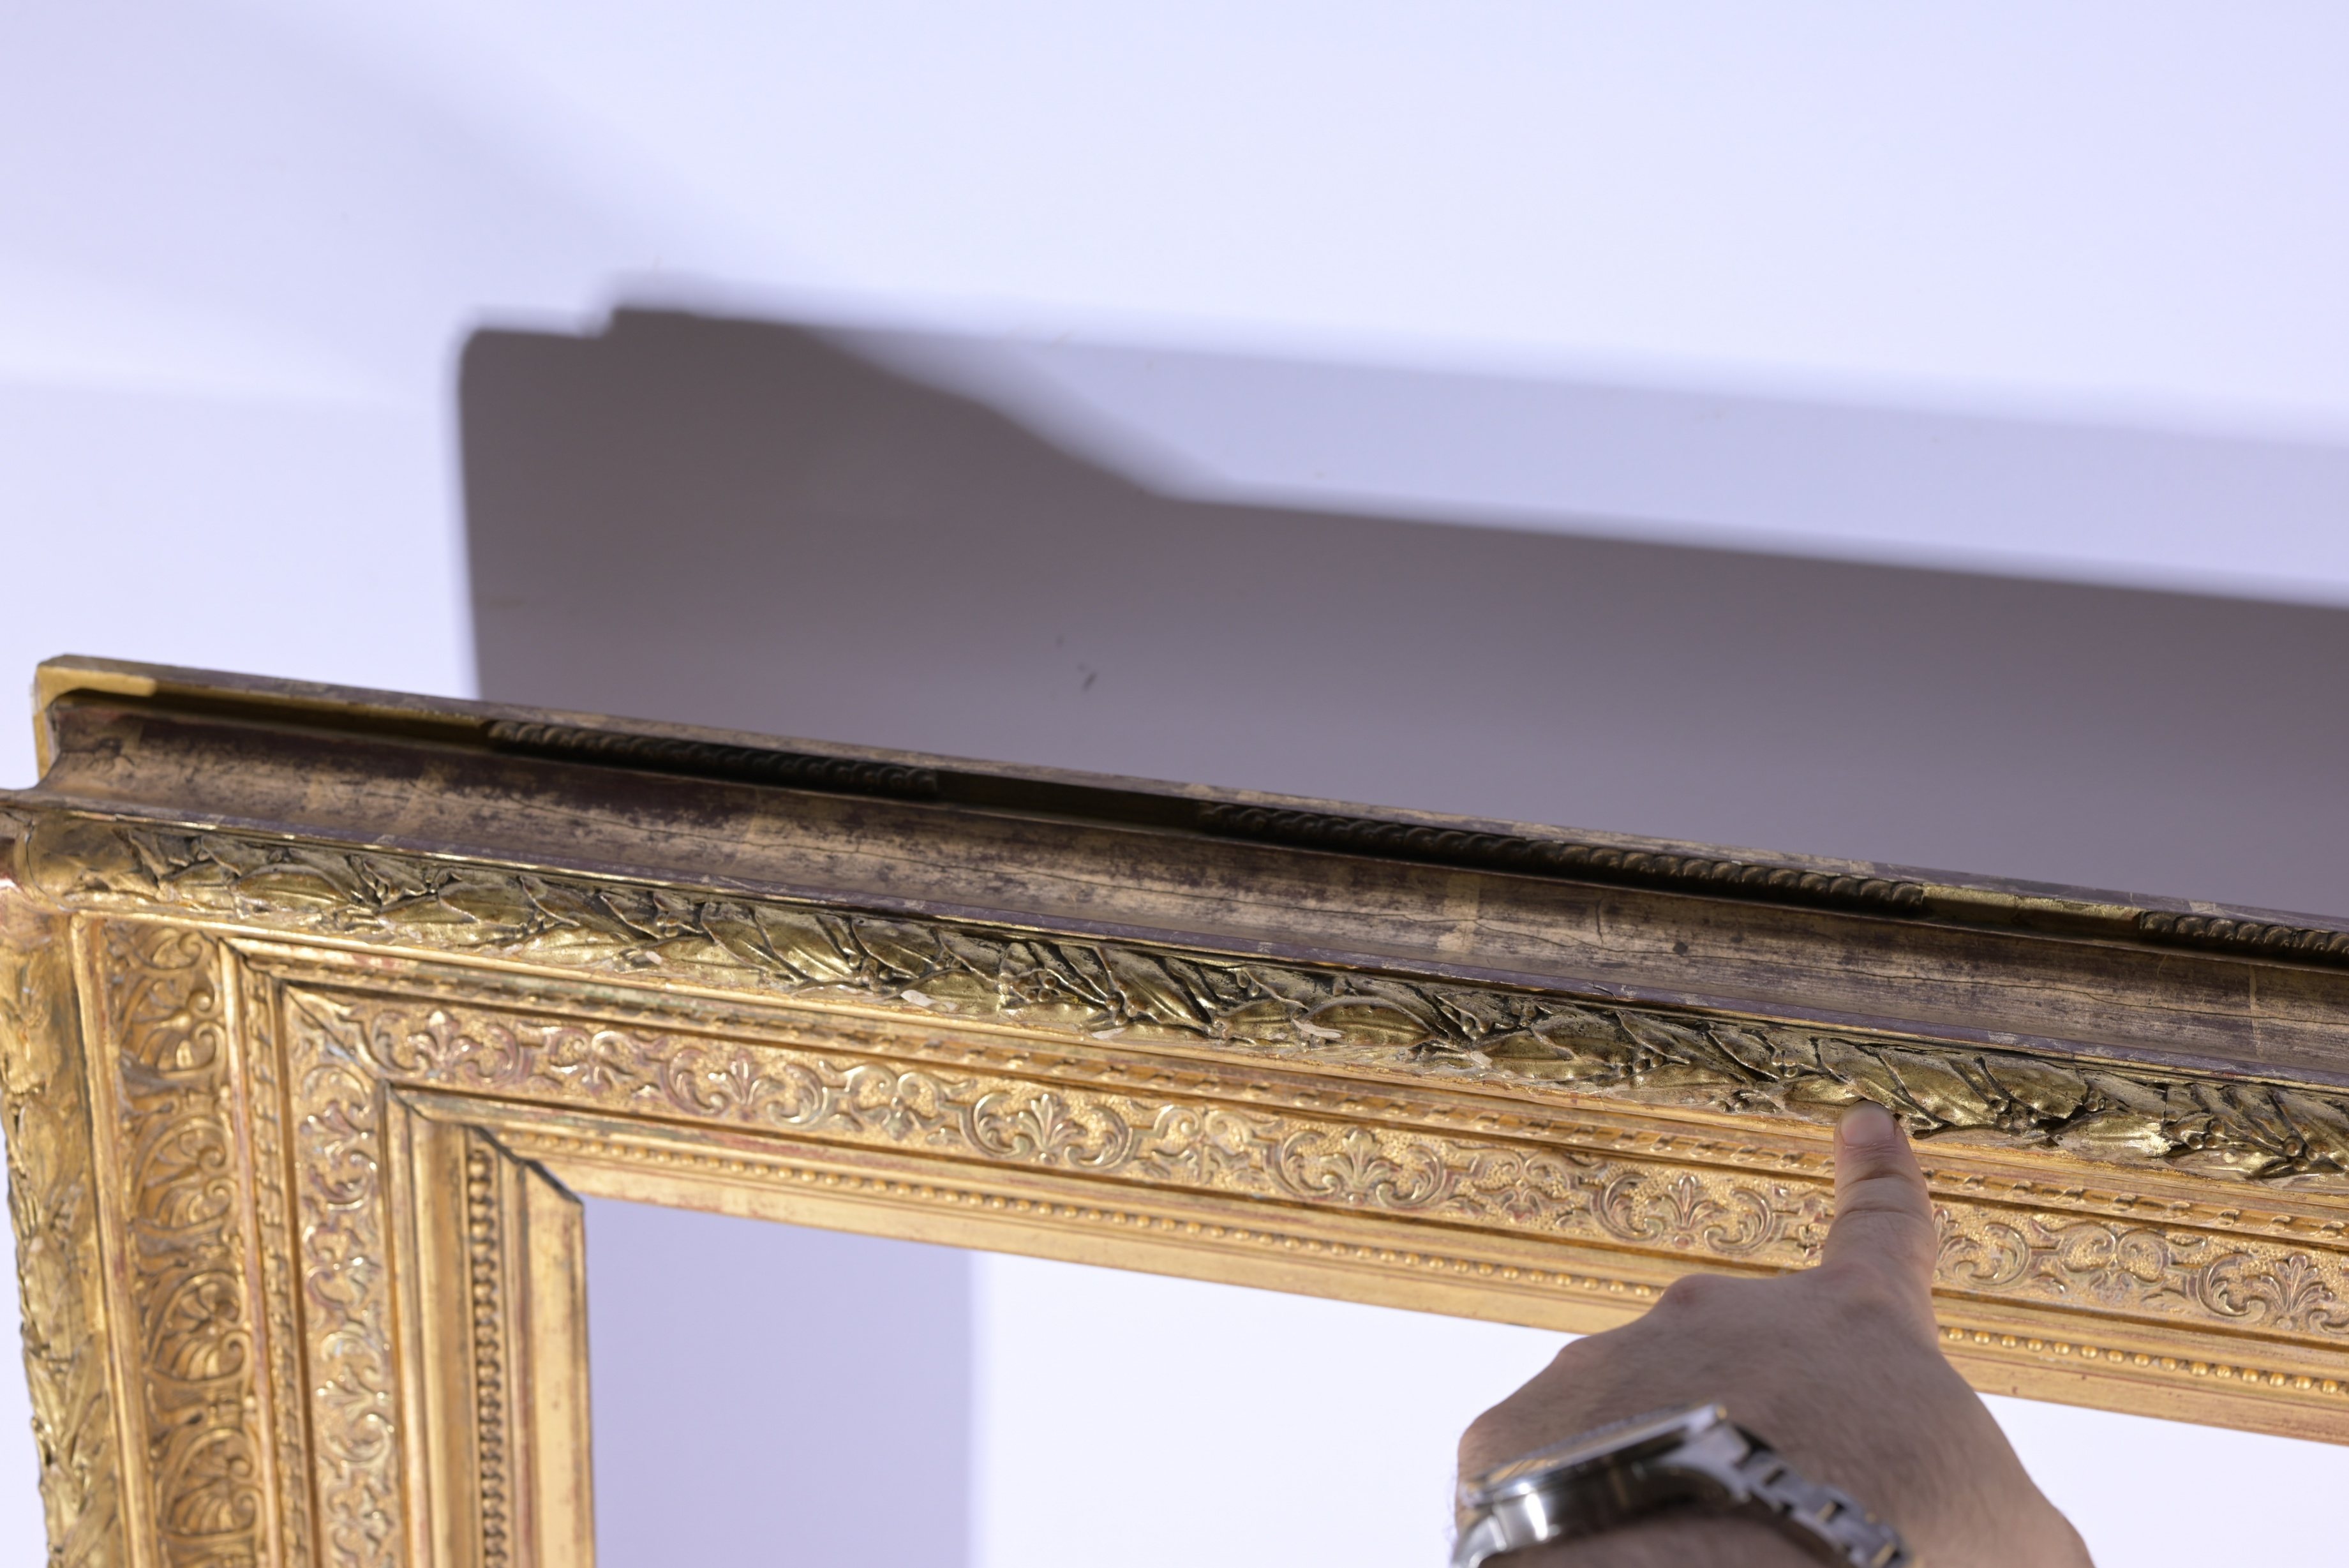 Exceptional 1860's French Gilt Frame - 16 x 24.5 - Image 9 of 11